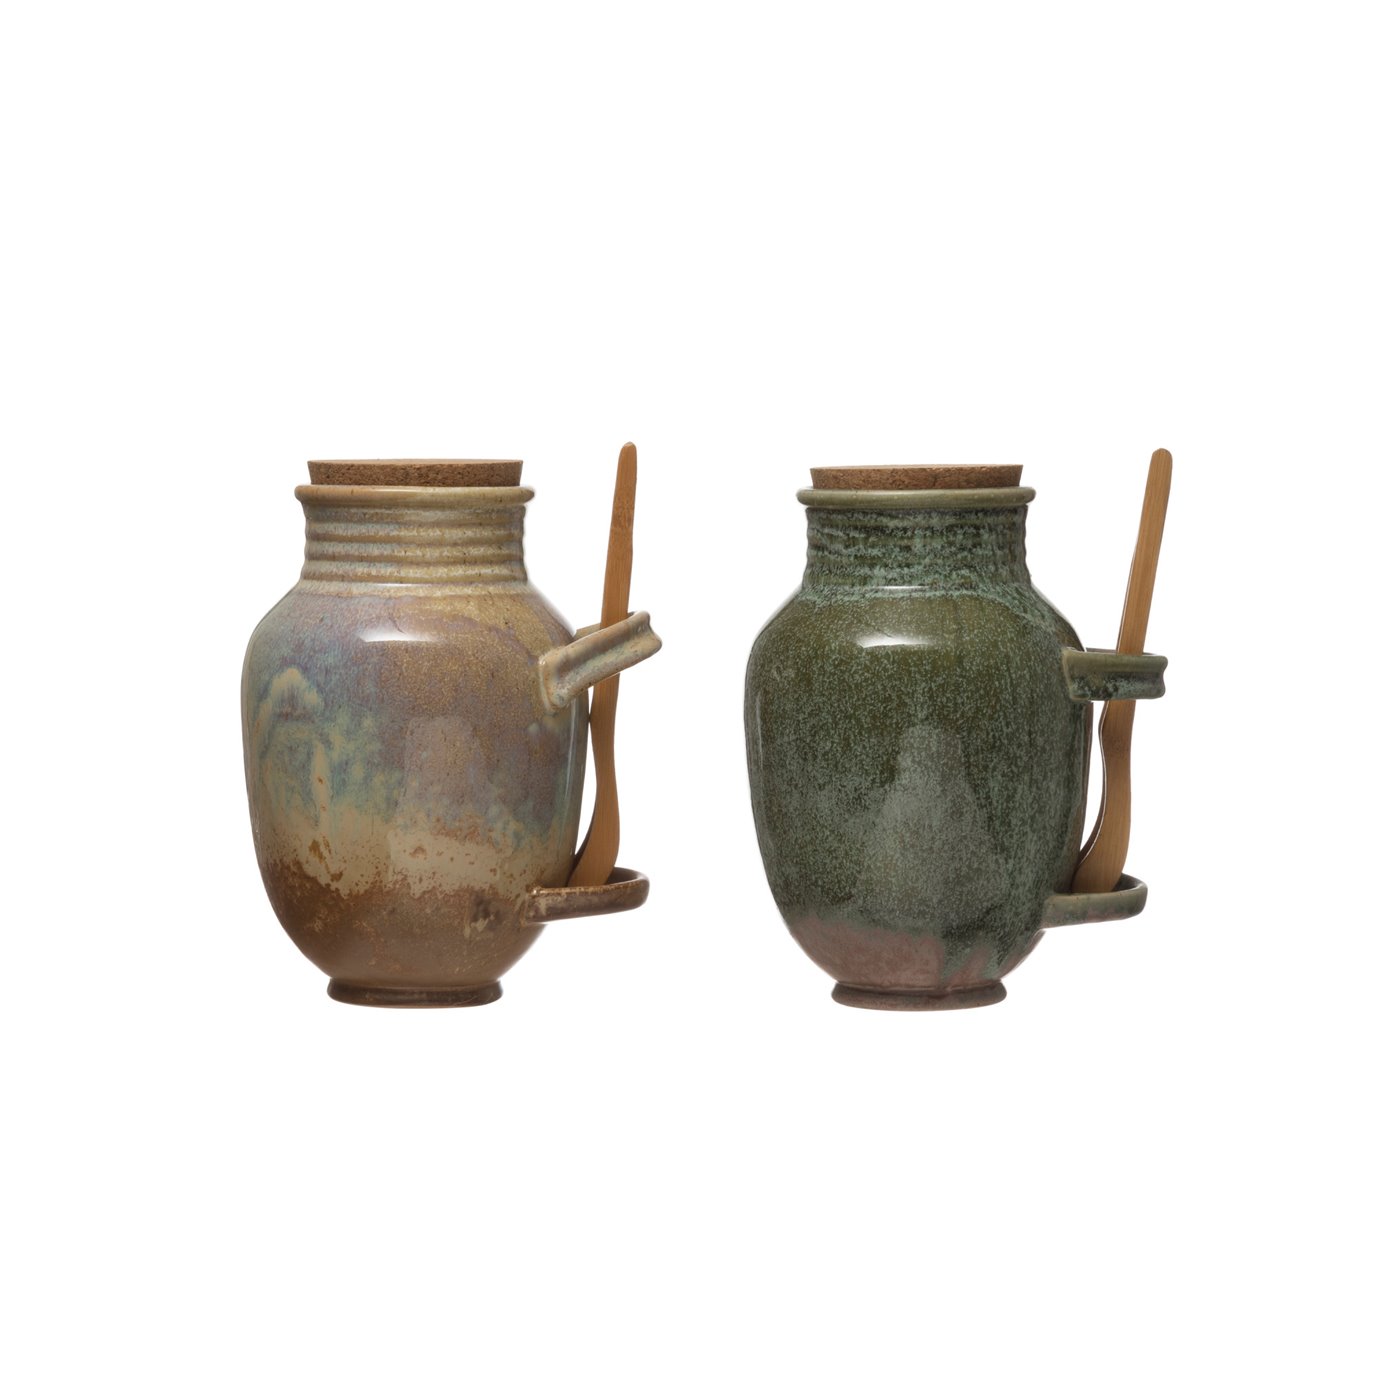 Vintage Reproduction Stoneware Olive Jar with Reactive Glaze Finish, Cork Lid & Wood Tongs (Set of 2 Colors/Each one will vary)